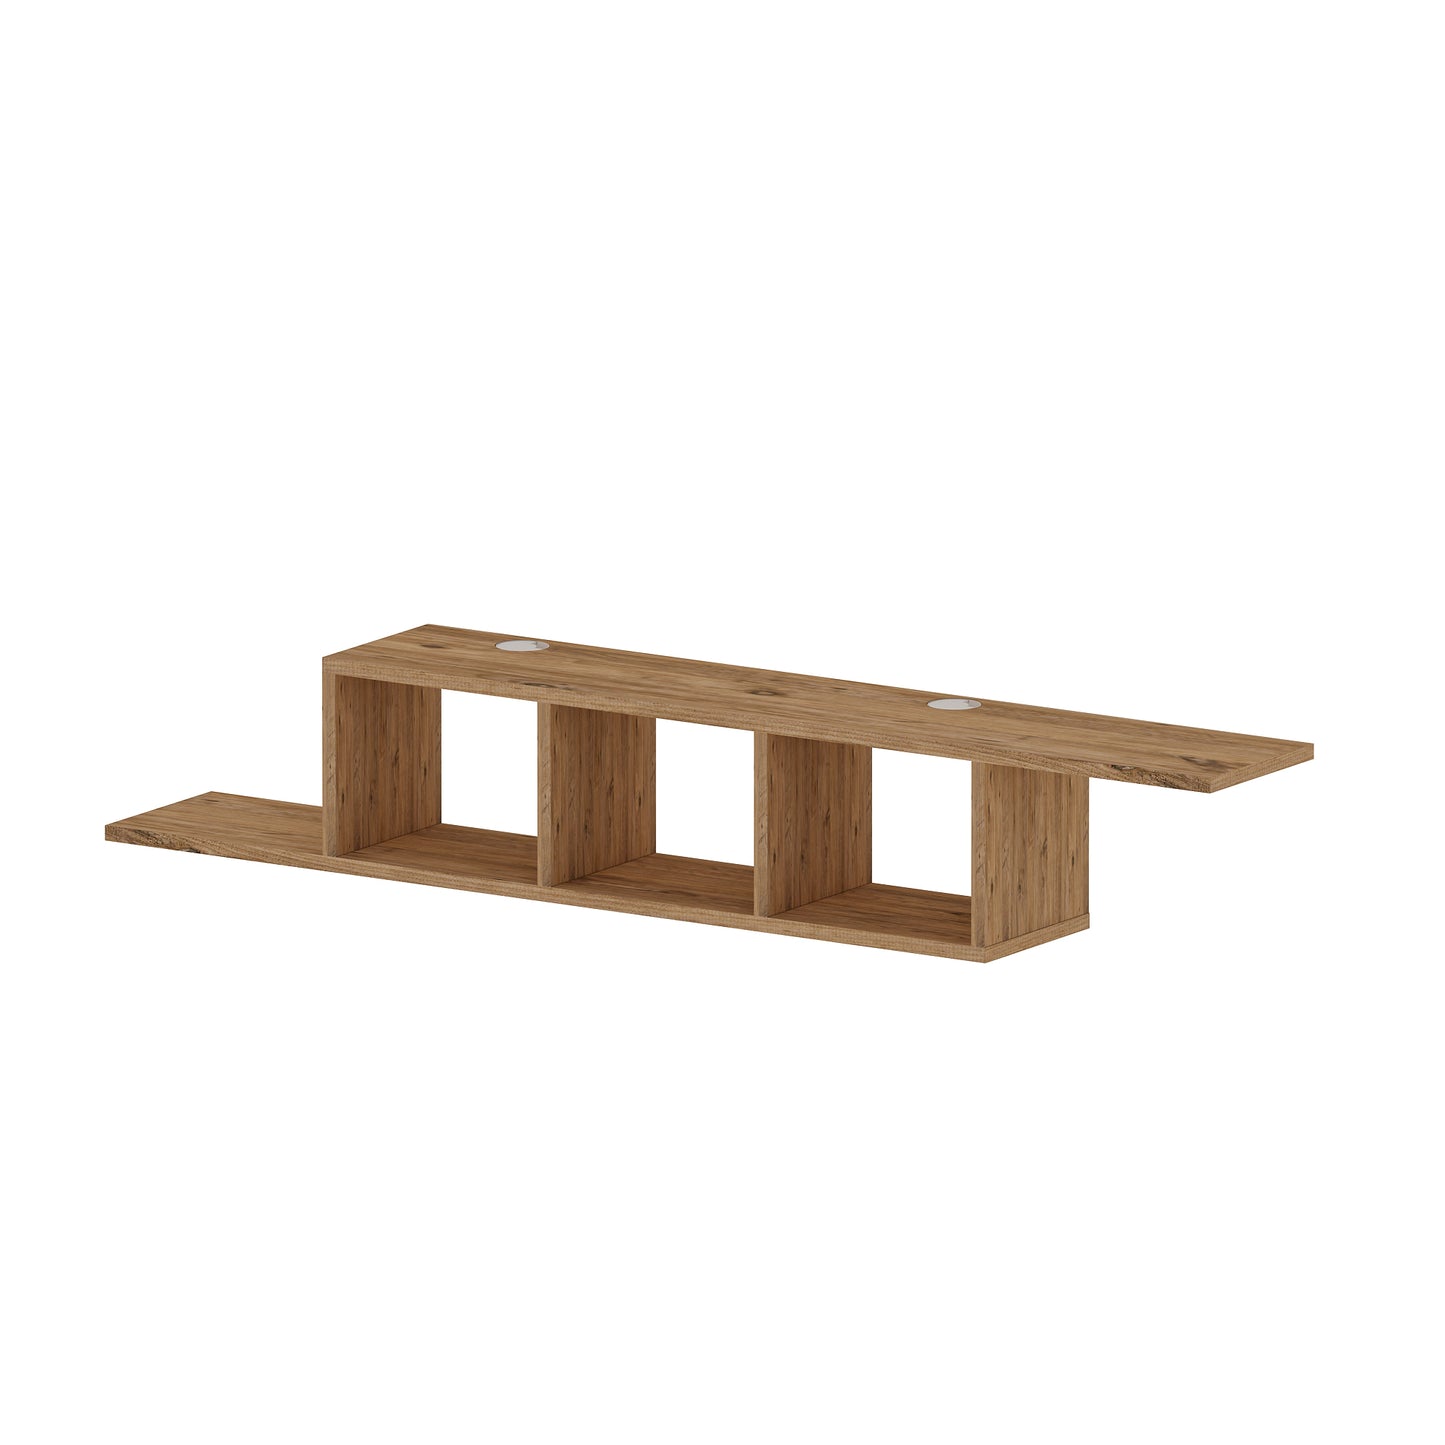 Harris Floating TV Stand with Shelves